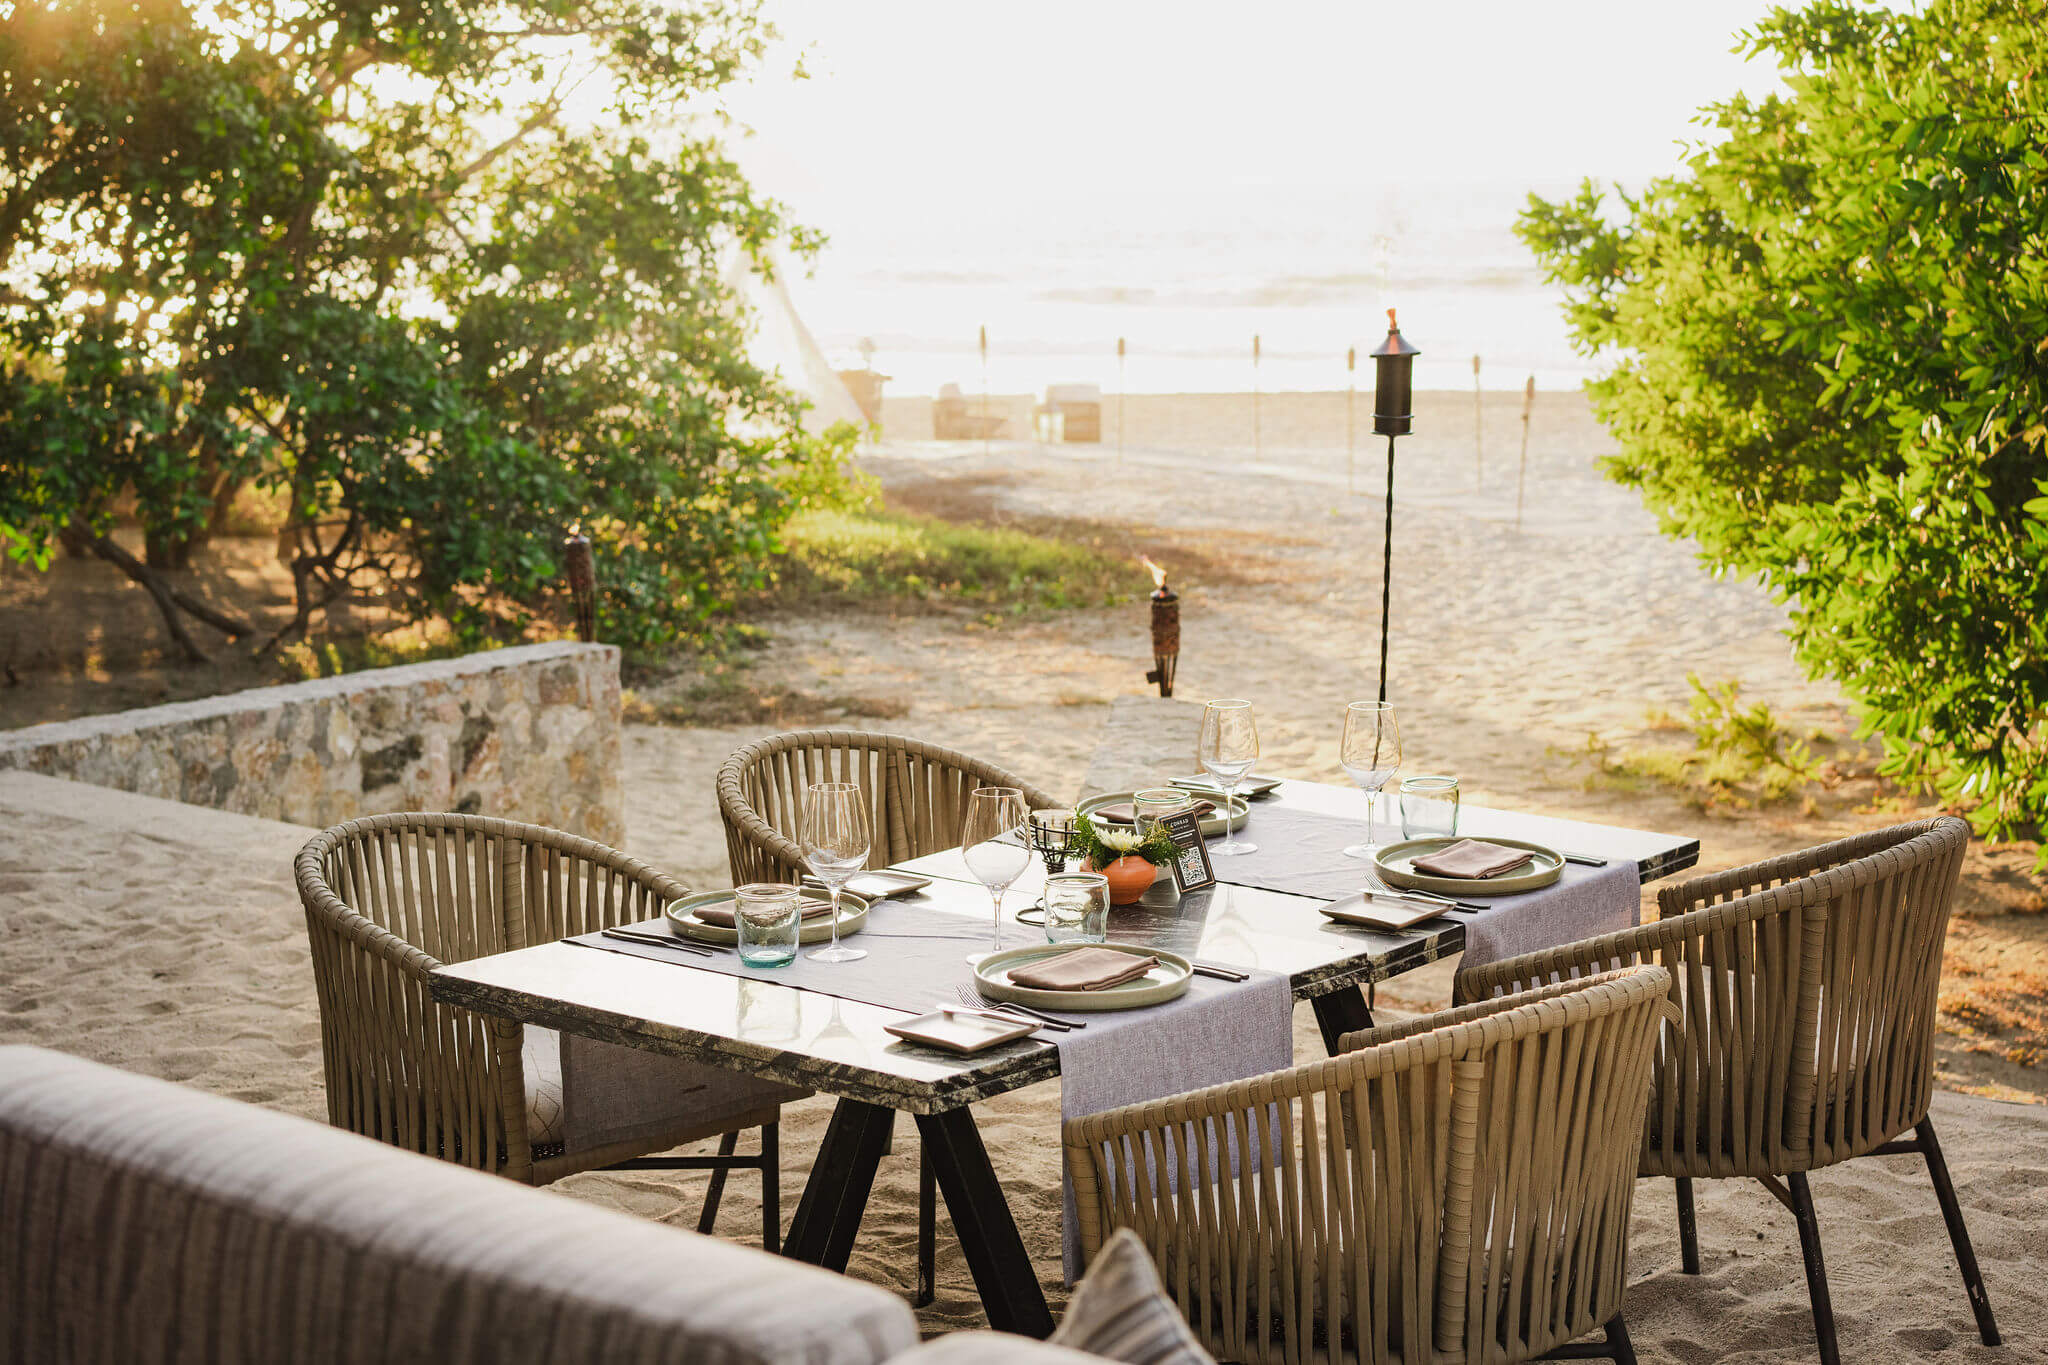 Picture of the dining table on the beach with the sea view